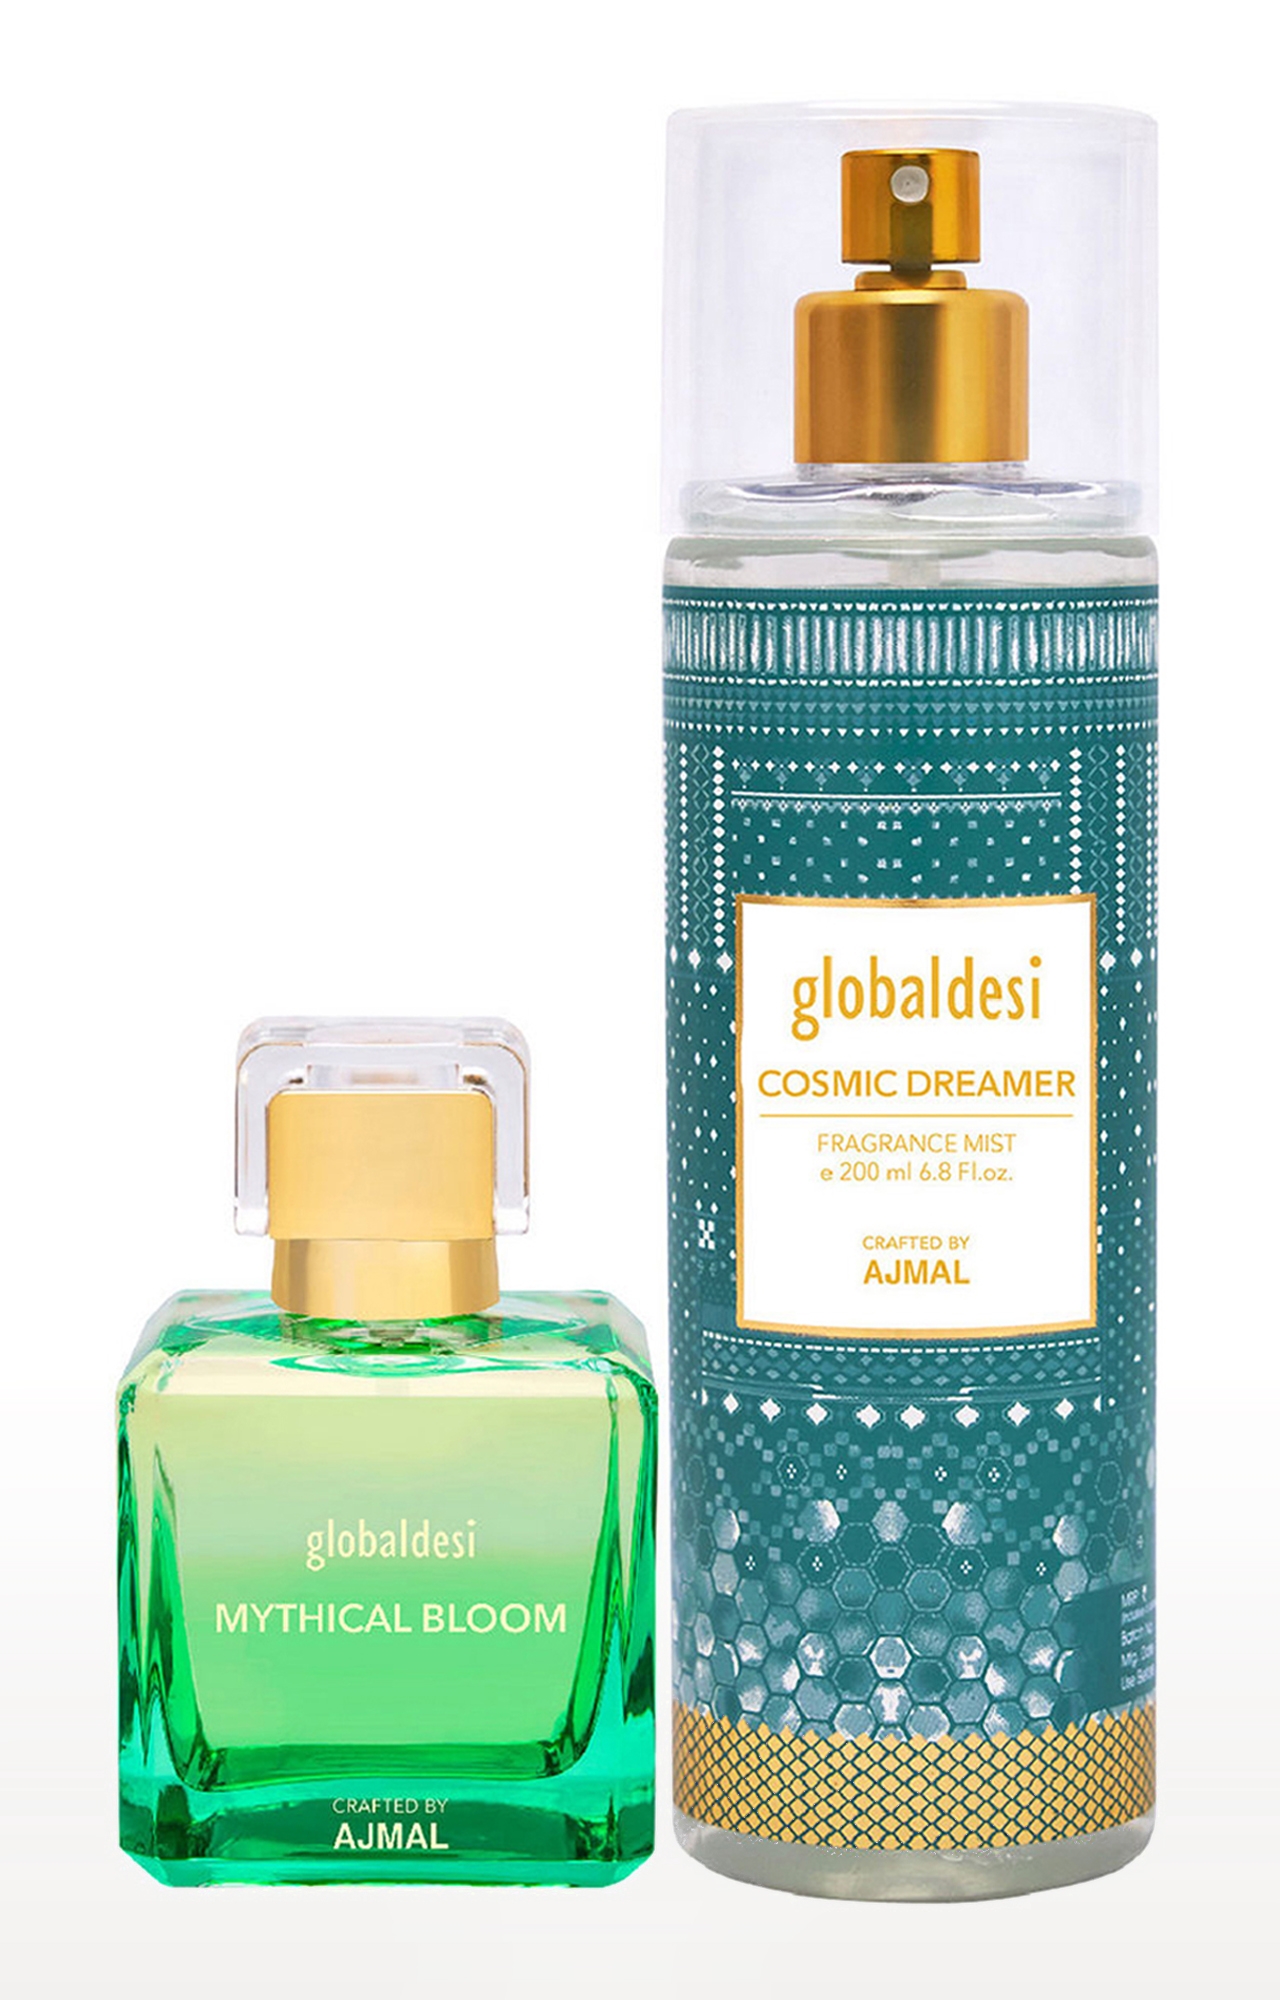 Global Mythical Bloom Eau De Parfum 50ML & Cosmic Dreamer Body Mist 200ML Pack of 2 for Women Crafted by Ajmal 